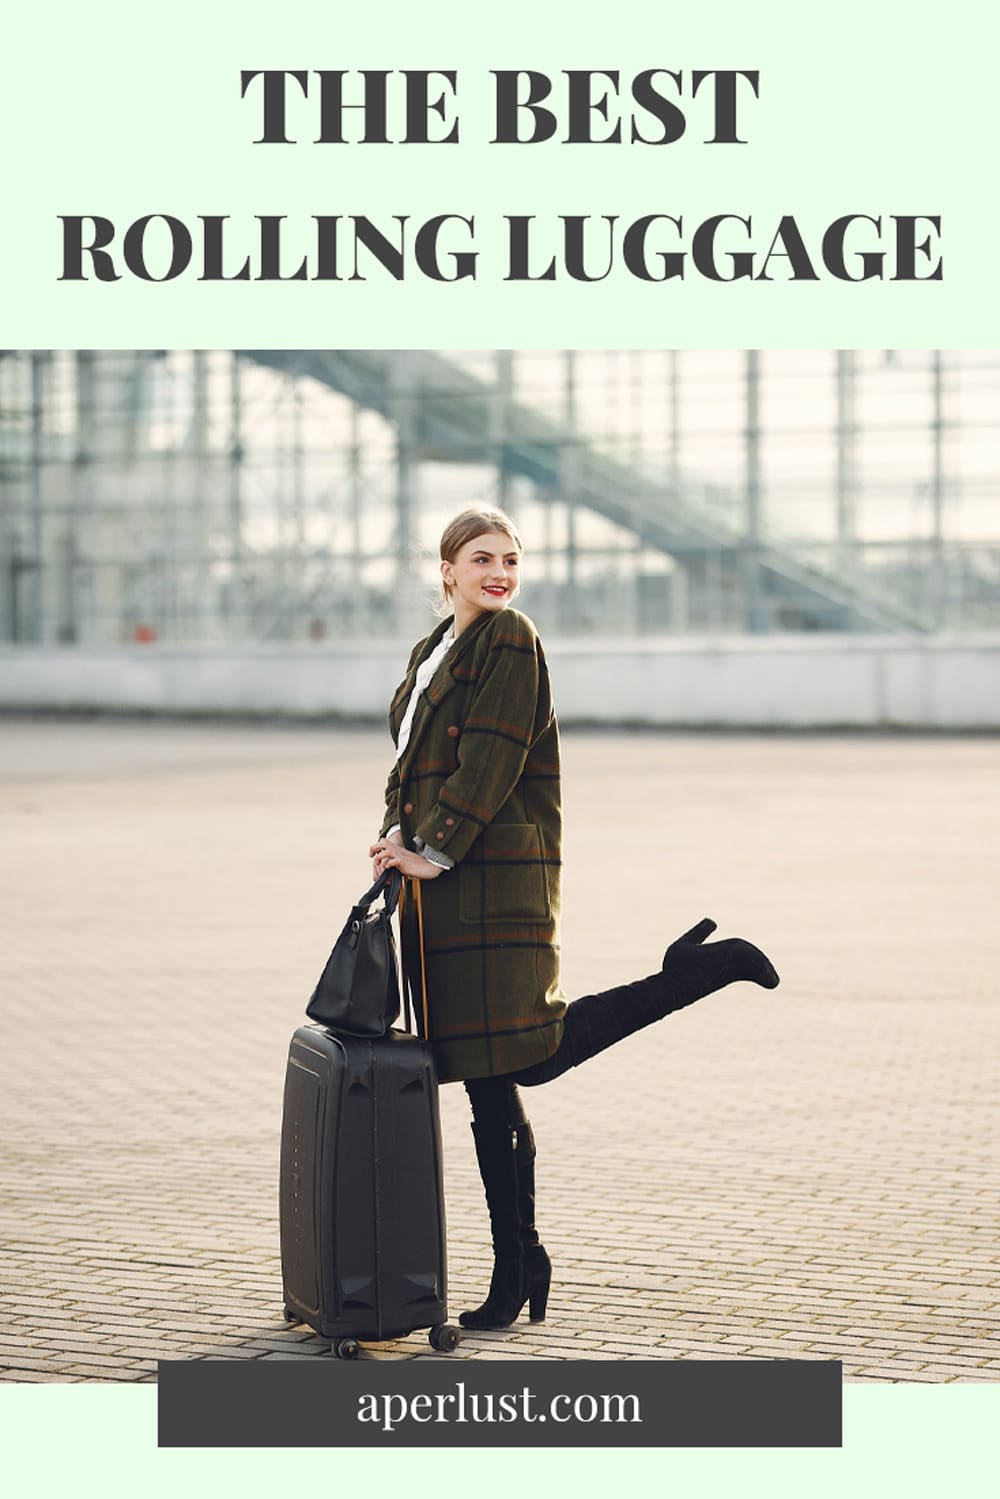 The Best Rolling Luggage Pinterest PIN